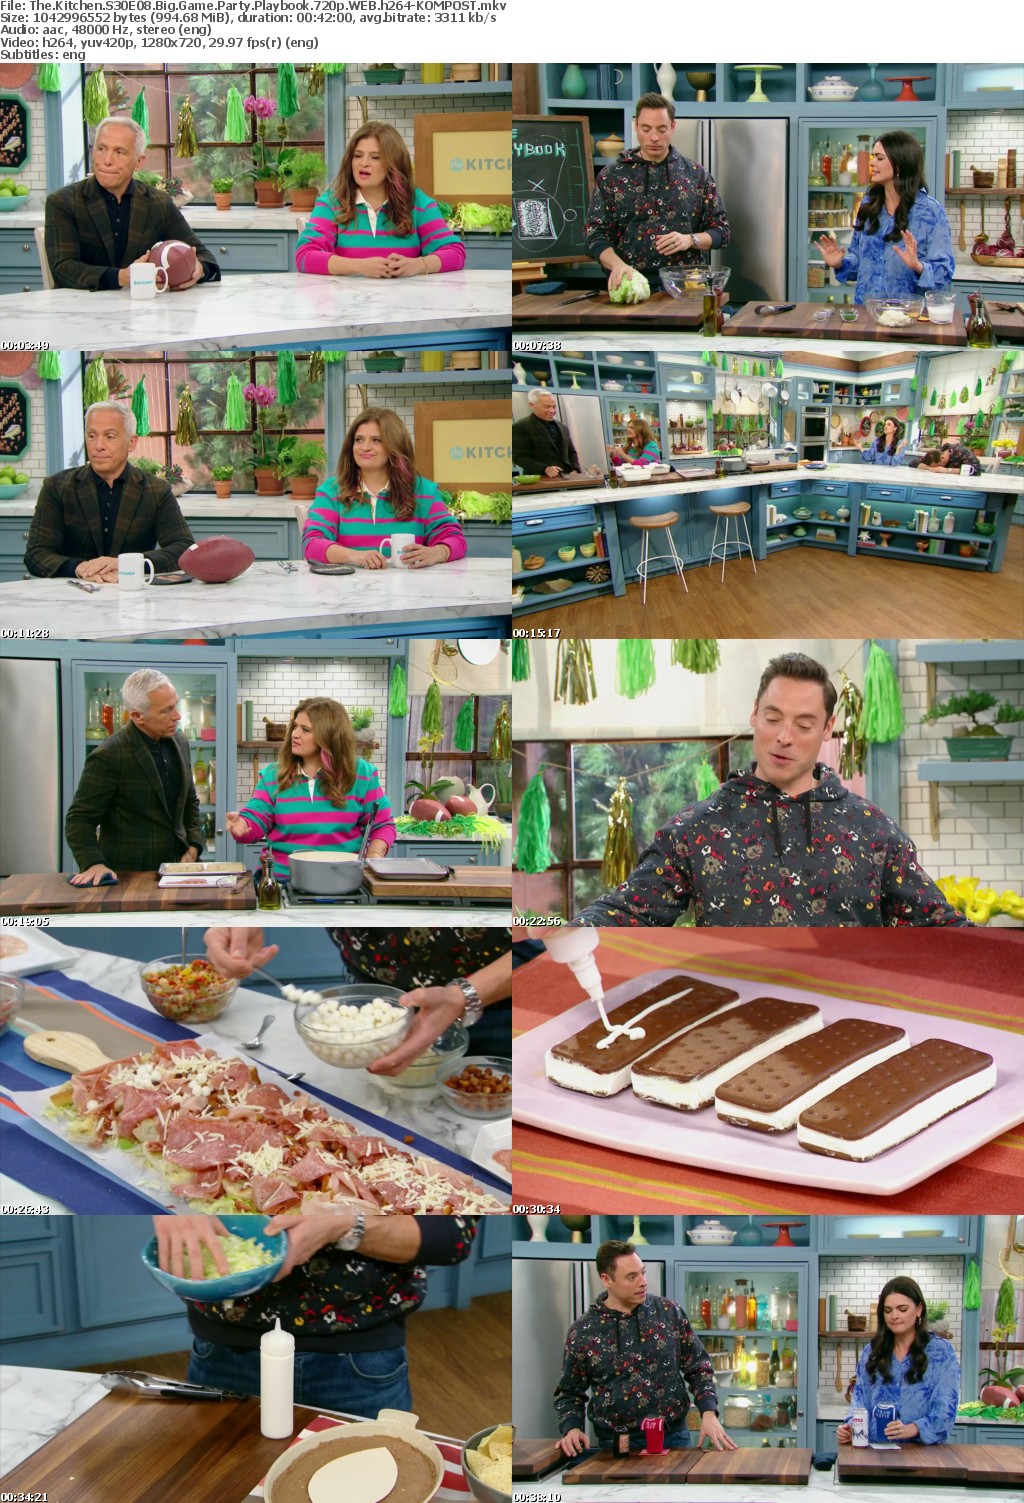 The Kitchen S30E08 Big Game Party Playbook 720p WEB h264-KOMPOST